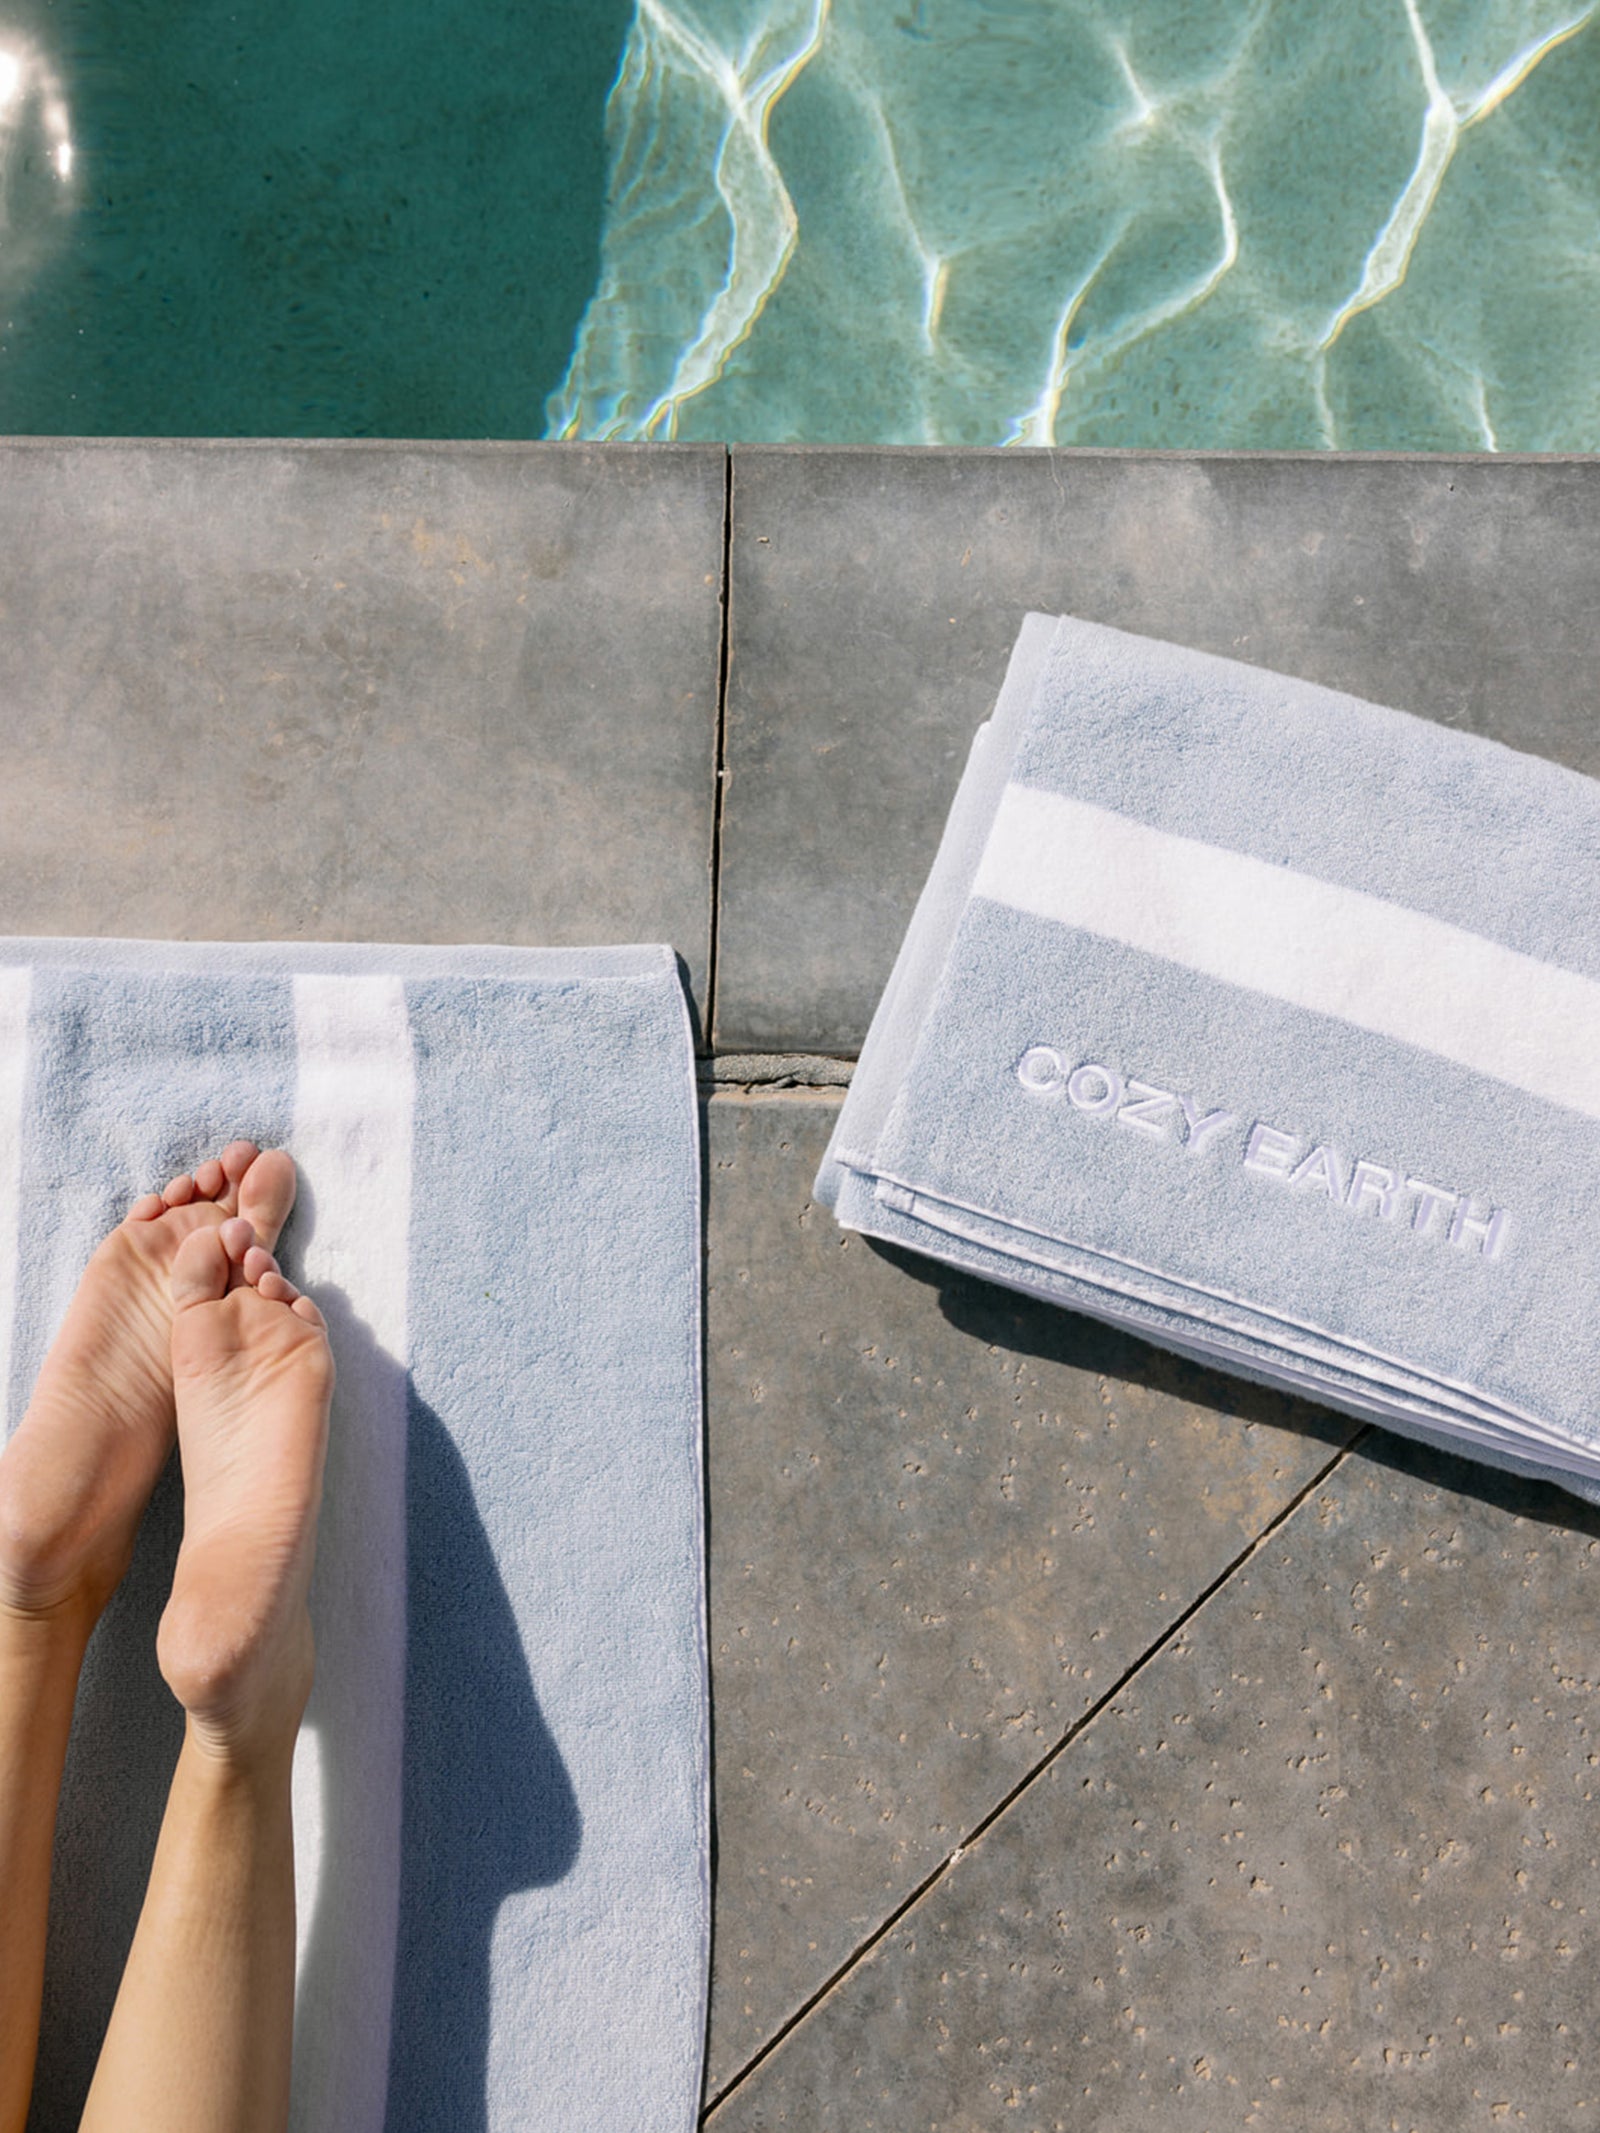 Two Cozy Earth breeze resort towels next to the pool 